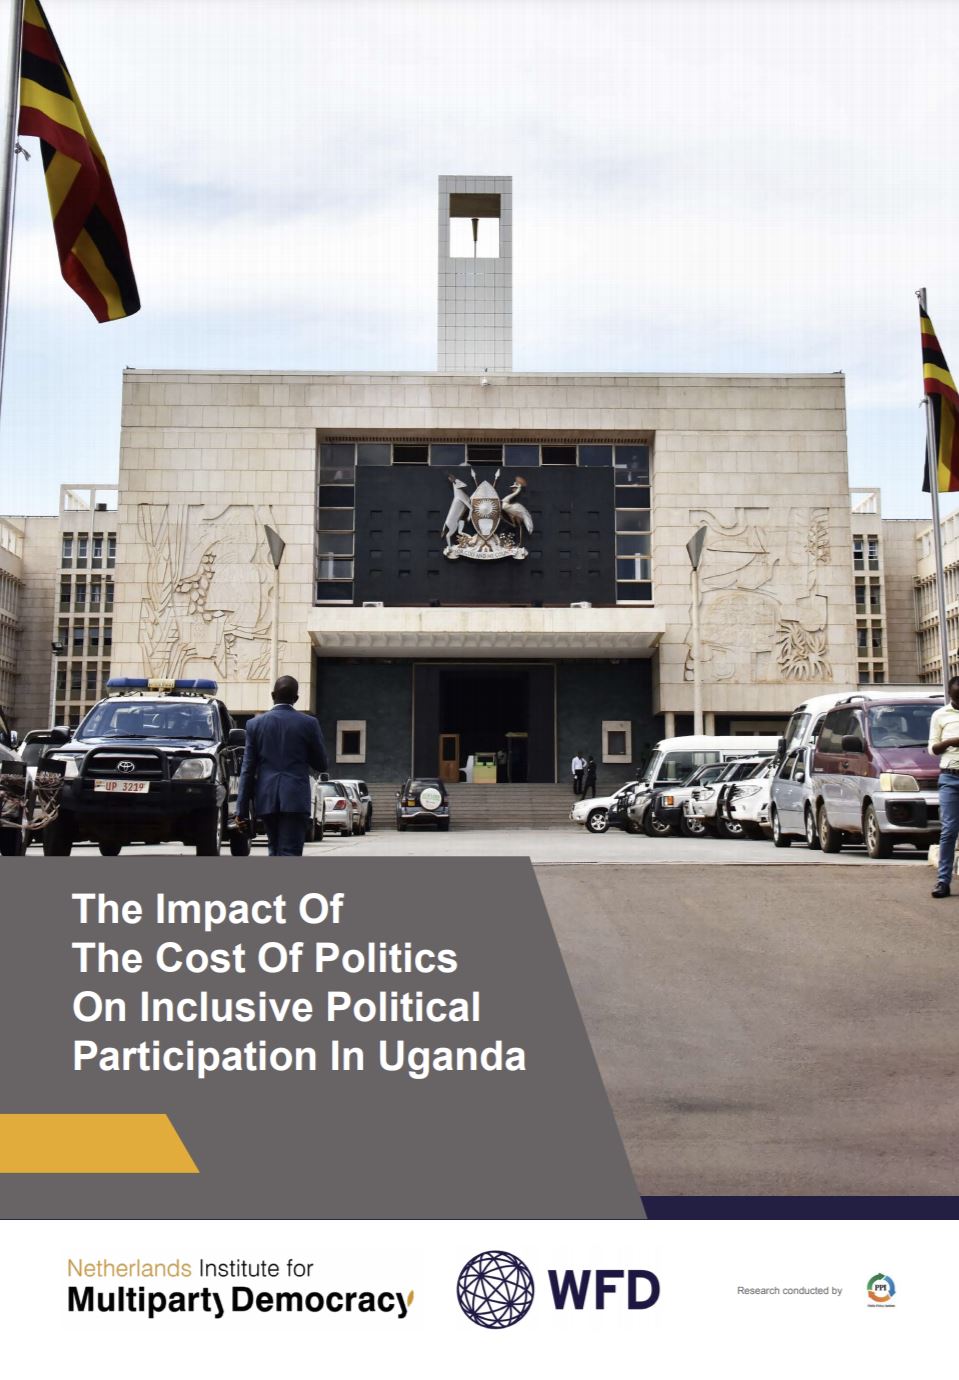 The impact of the cost of politics on inclusive political participation